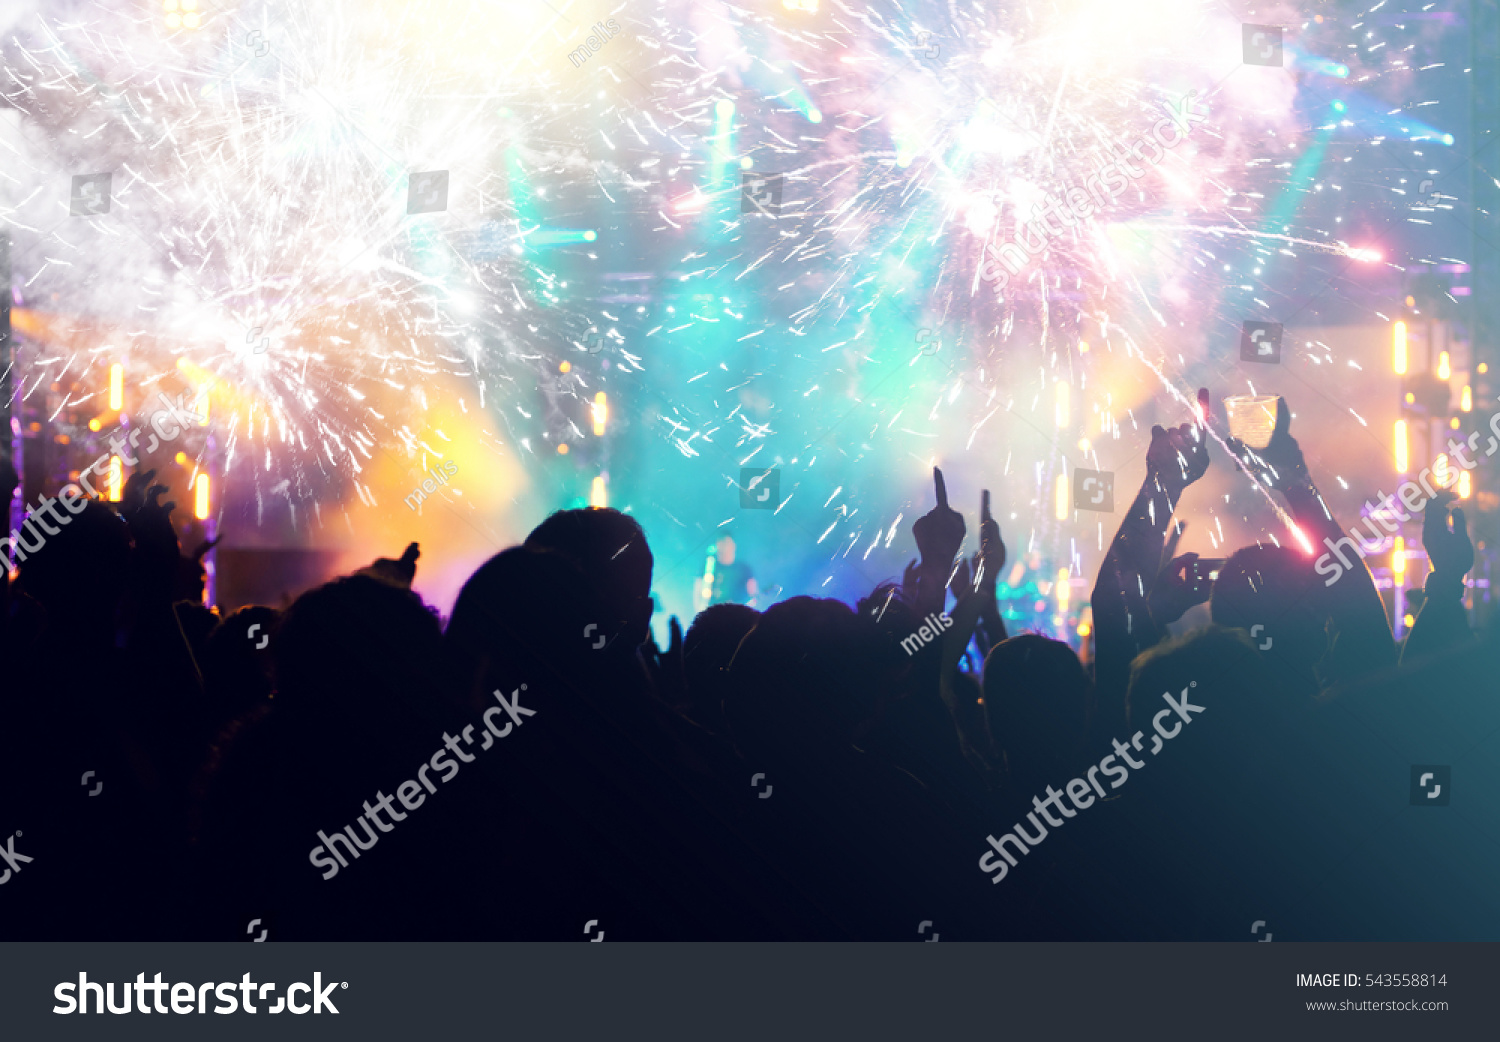 New Year concept - fireworks and cheering crowd celebrating the New year #543558814